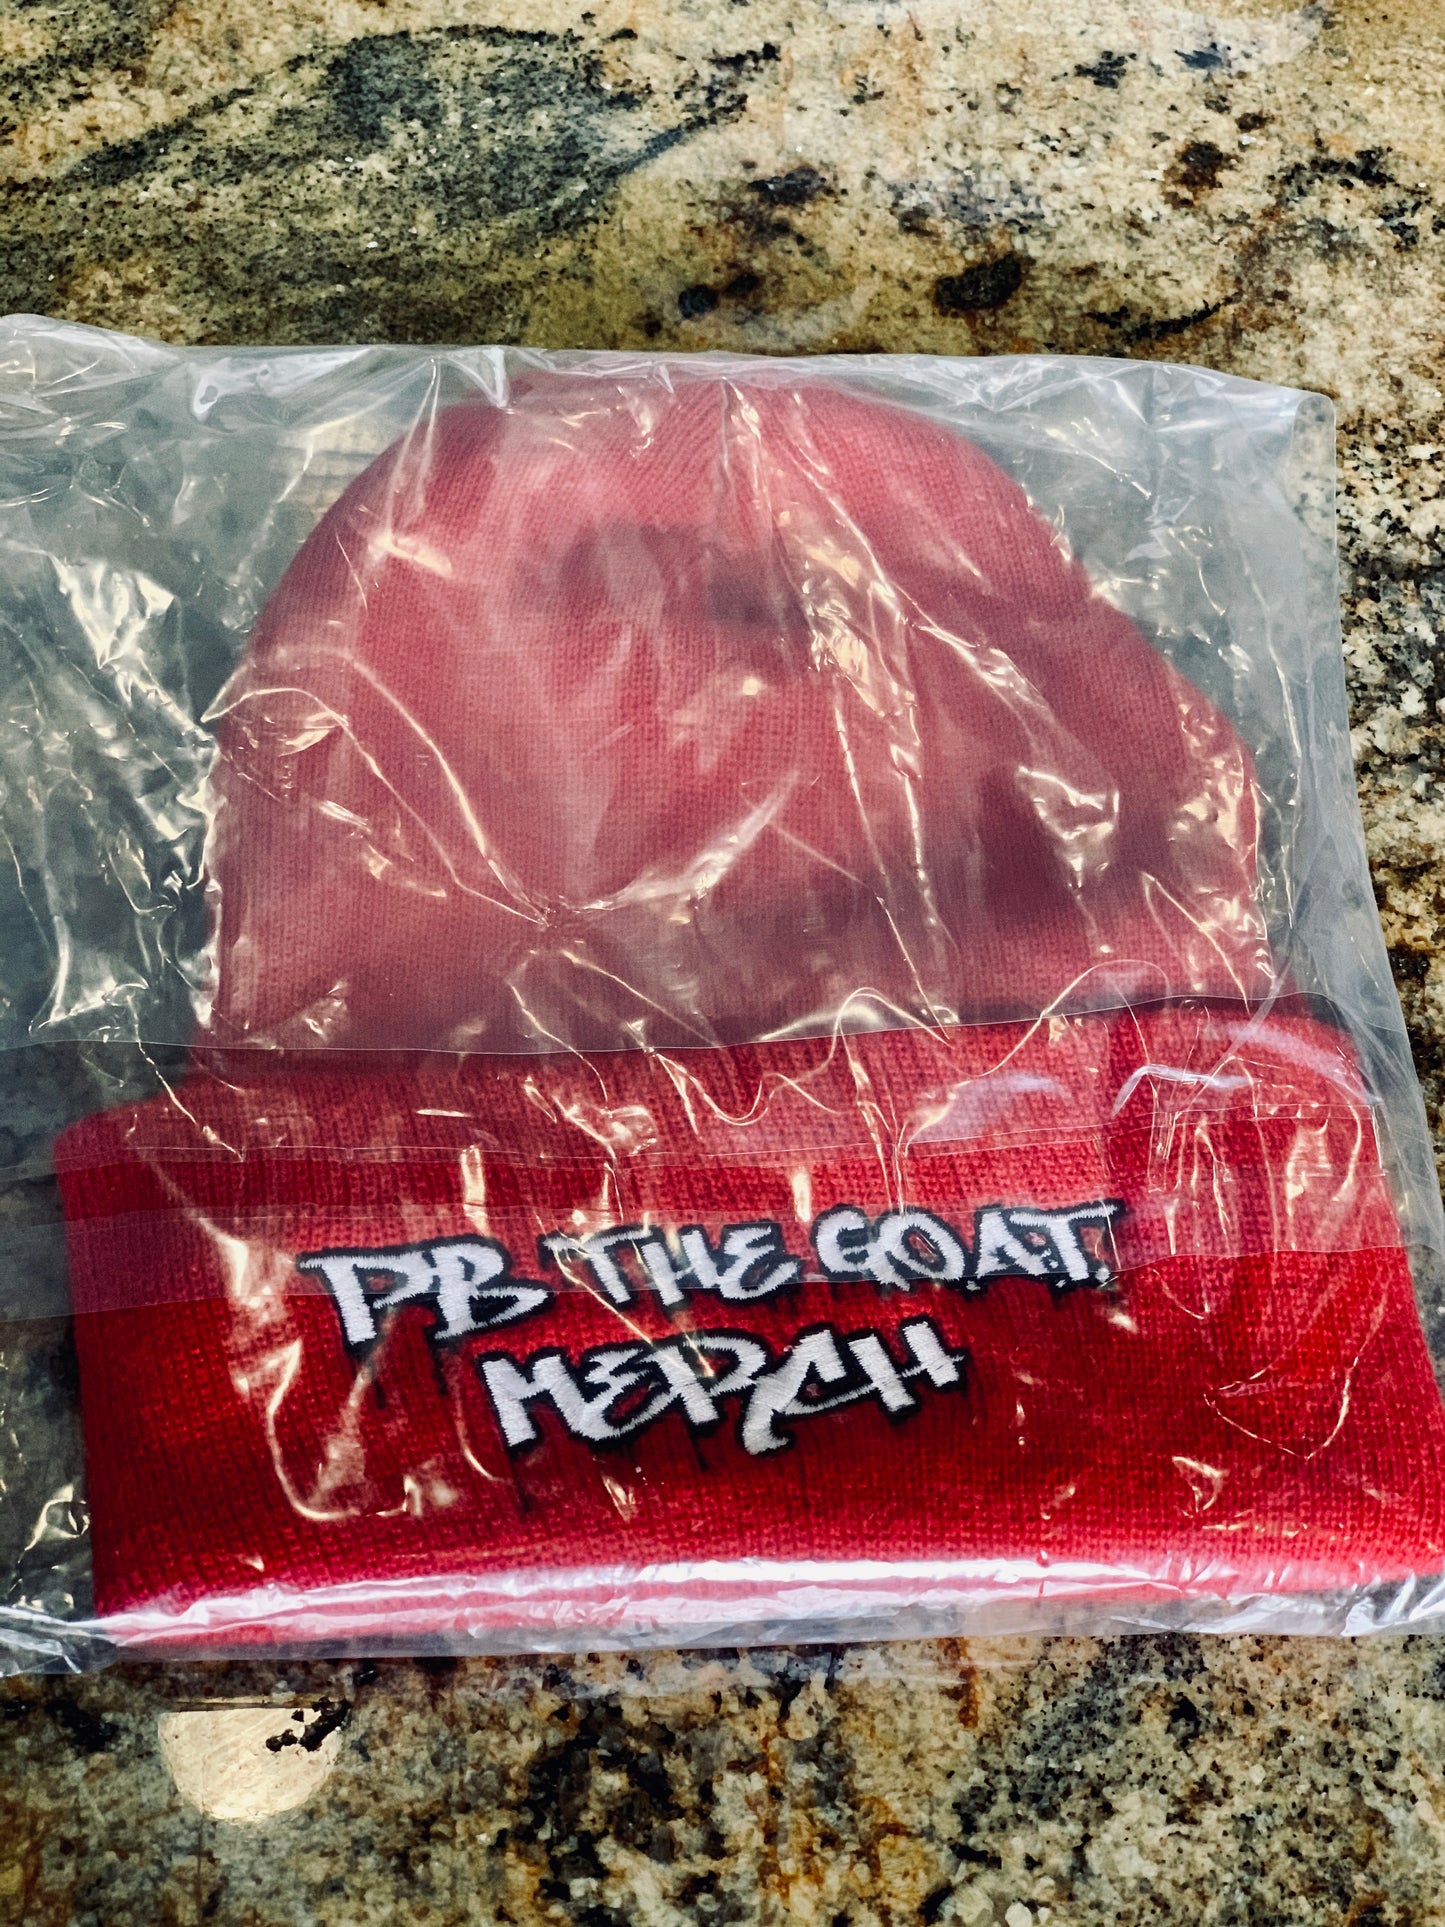 The Official Pb The Goat Merch Beanie!